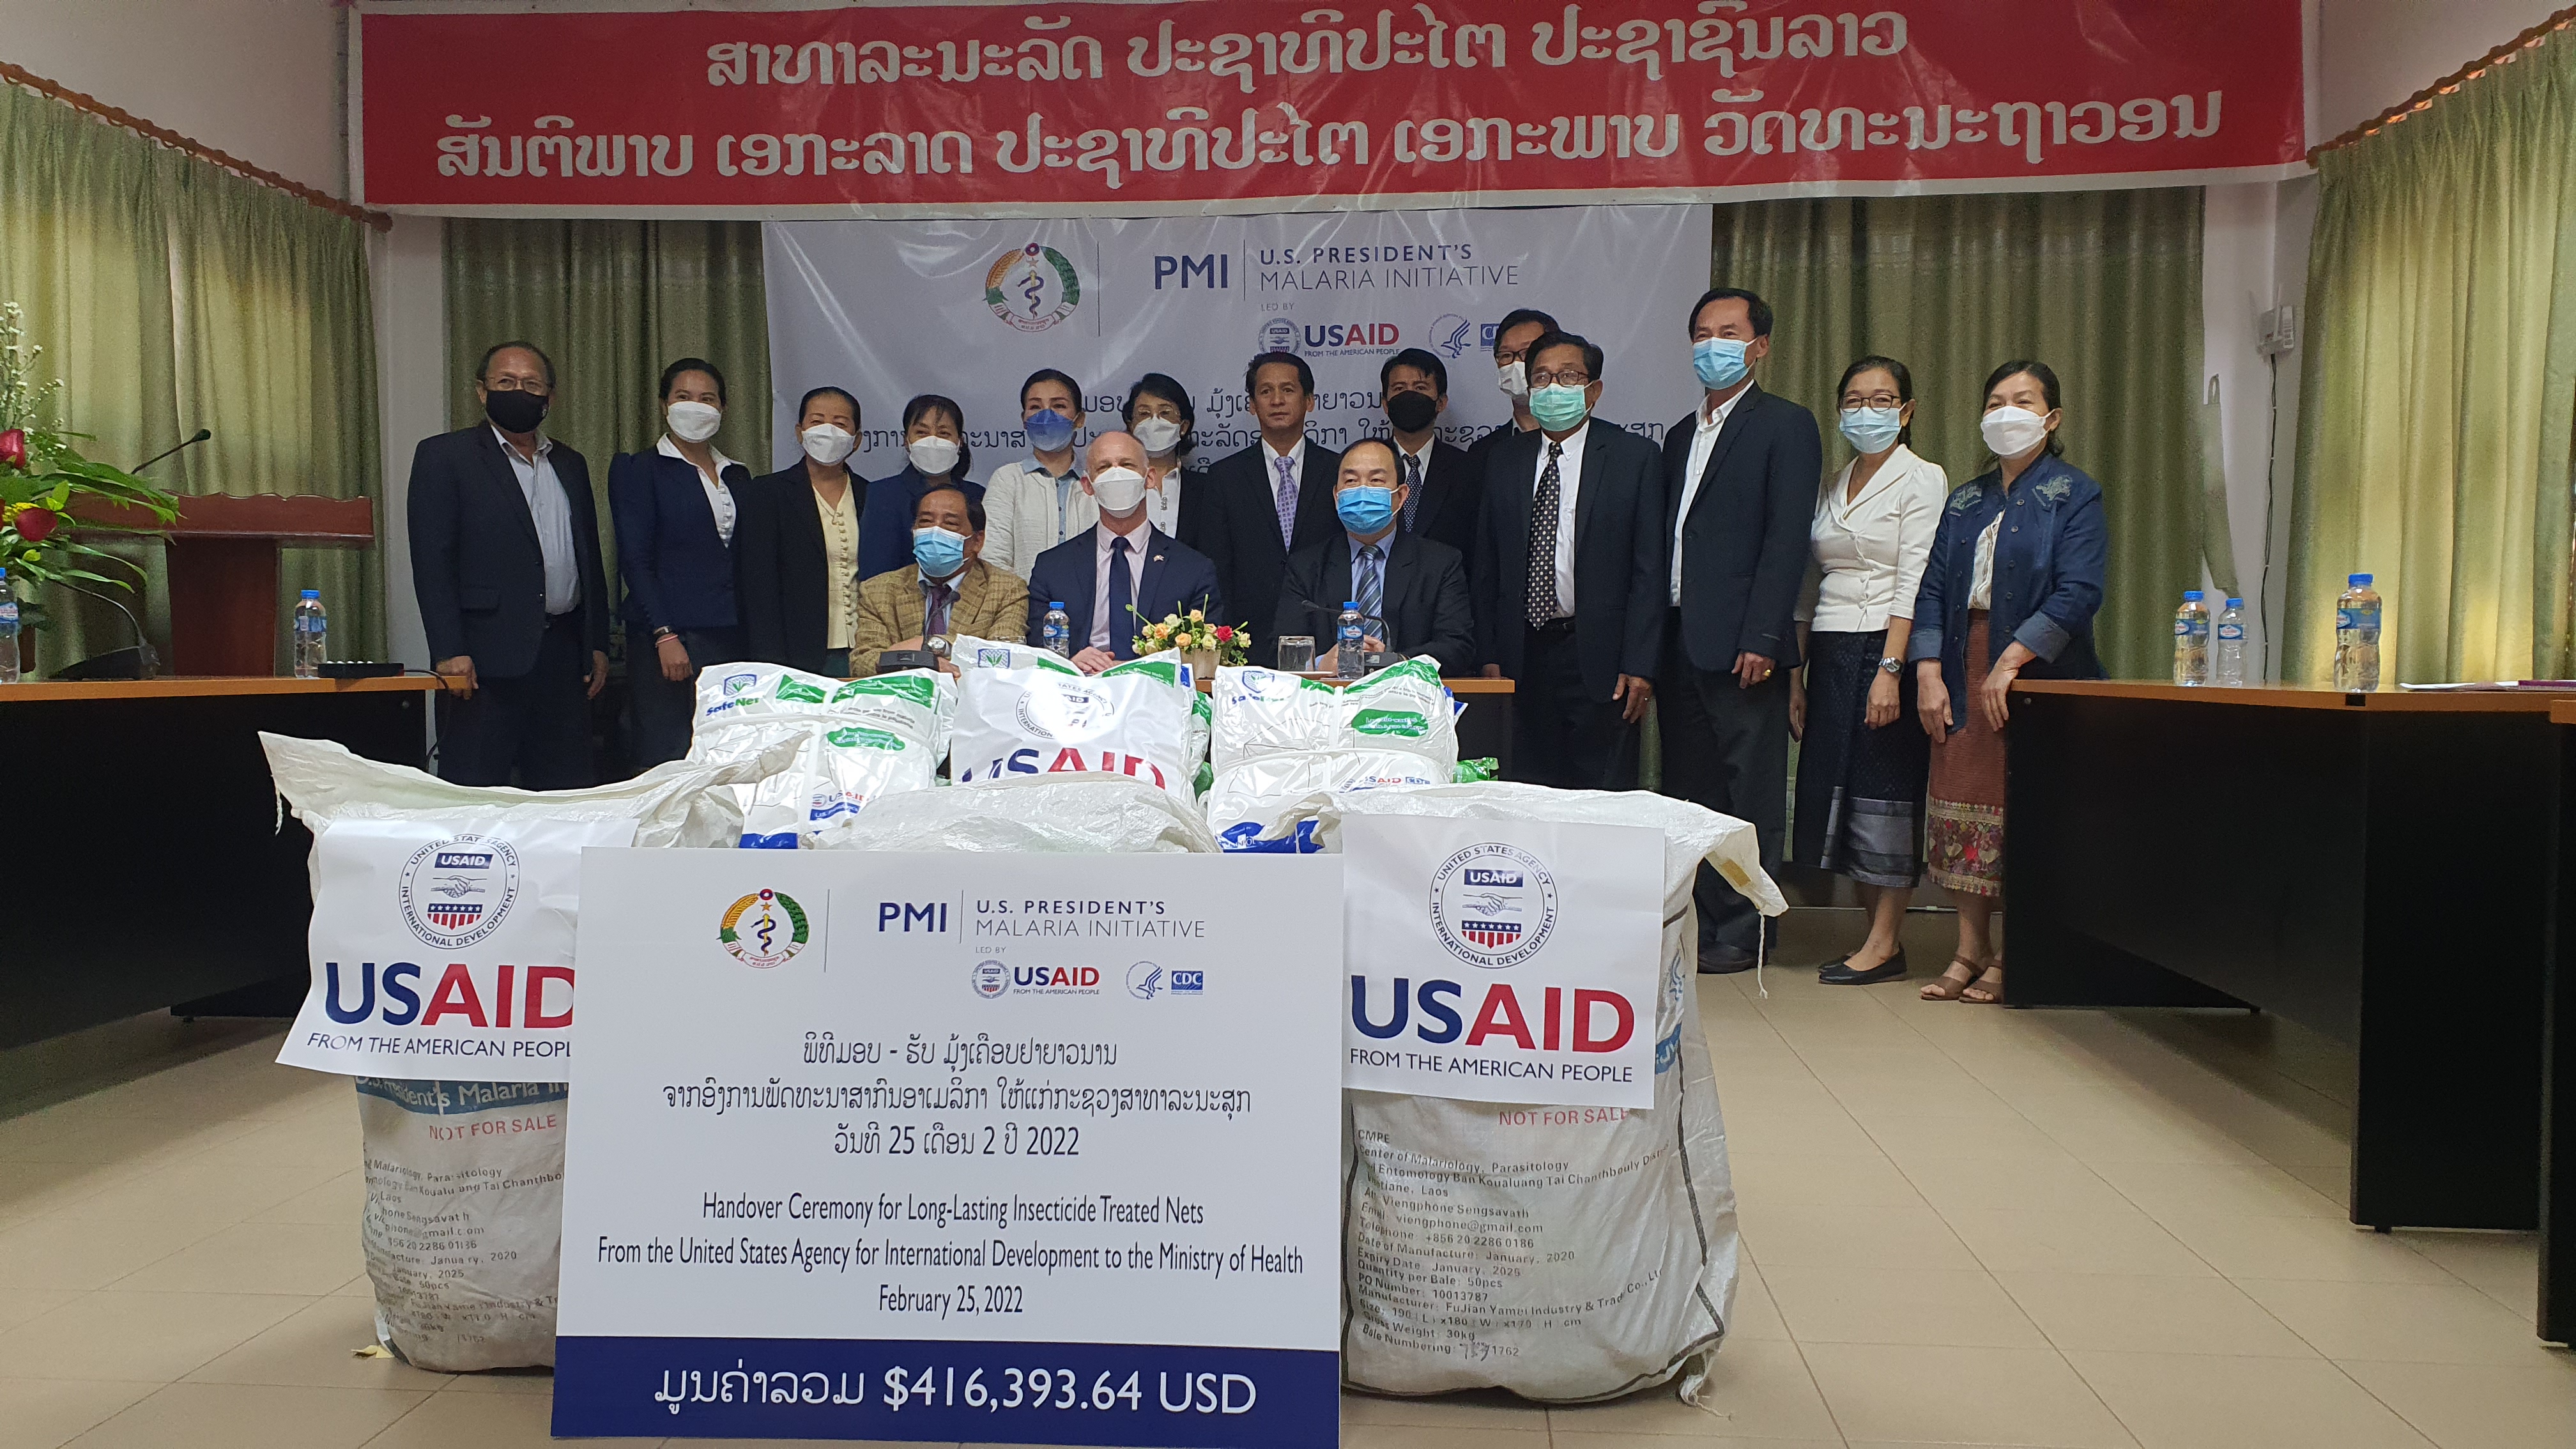 USAID Country Representative Michael Ronning leads the handover ceremony for the donation of bednets to the Laos Government.